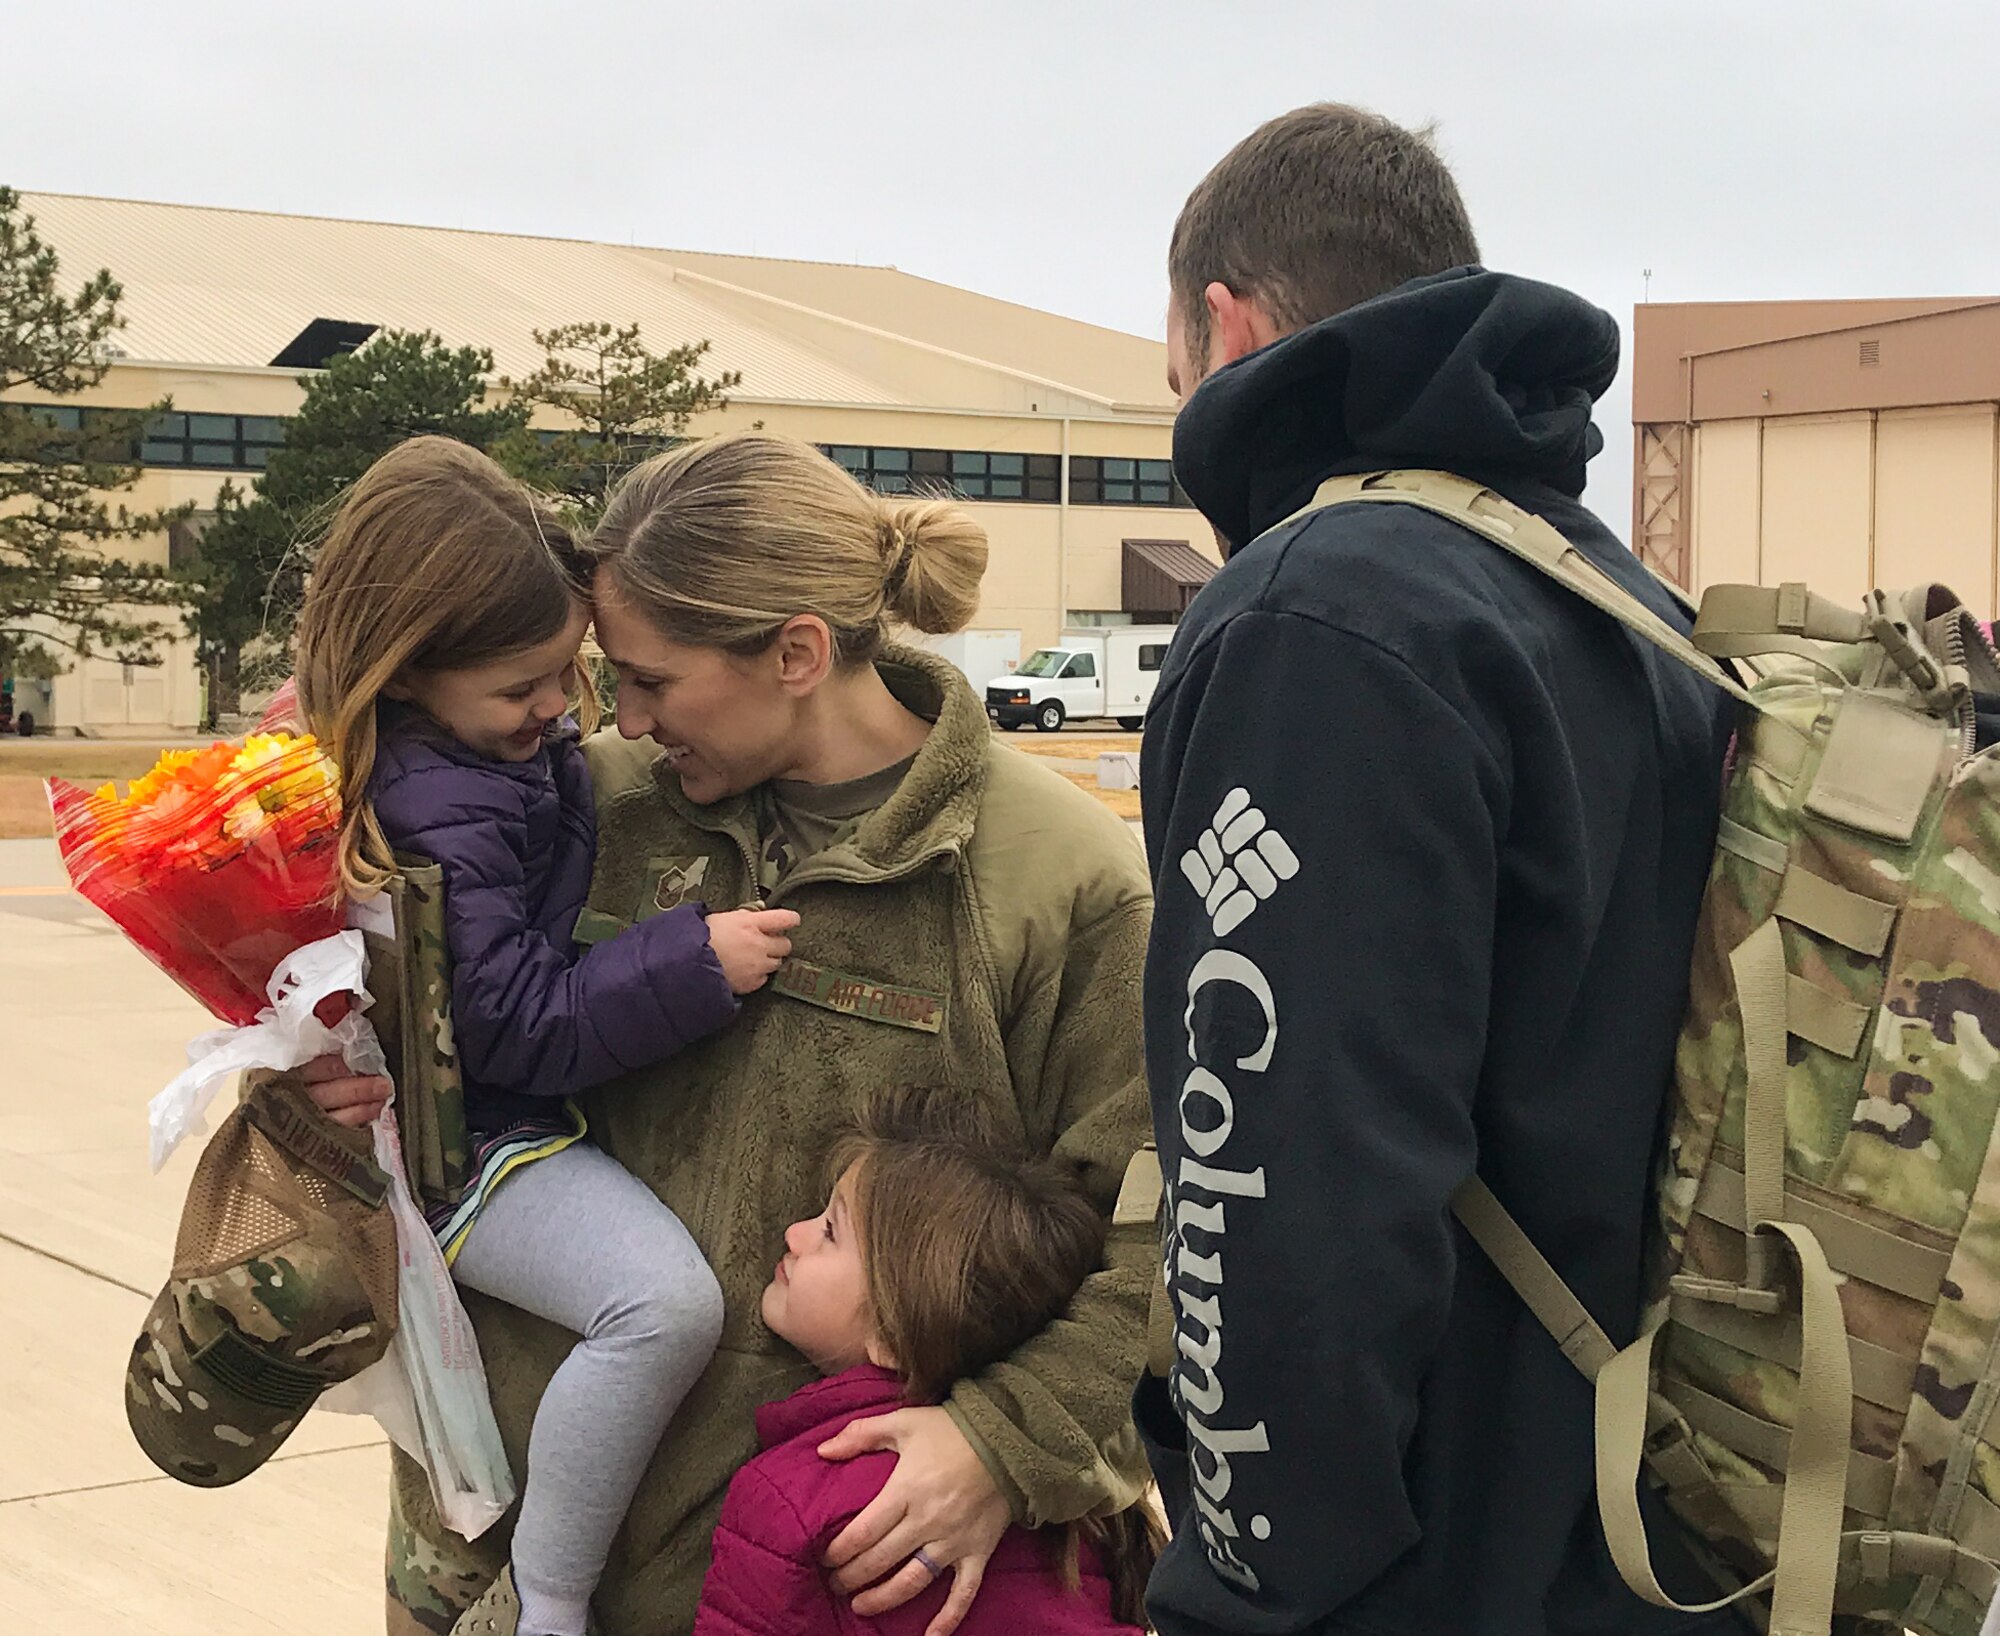 Master Sgt. Jennifer Wright, all-source intelligence analyst with the 507th Operations Support Squadron, greets her family upon returning home from a deployment to Southwest Asia Nov. 25, 2019, at Tinker Air Force Base, Oklahoma. (U.S. Air Force photo by Lauren Kelly